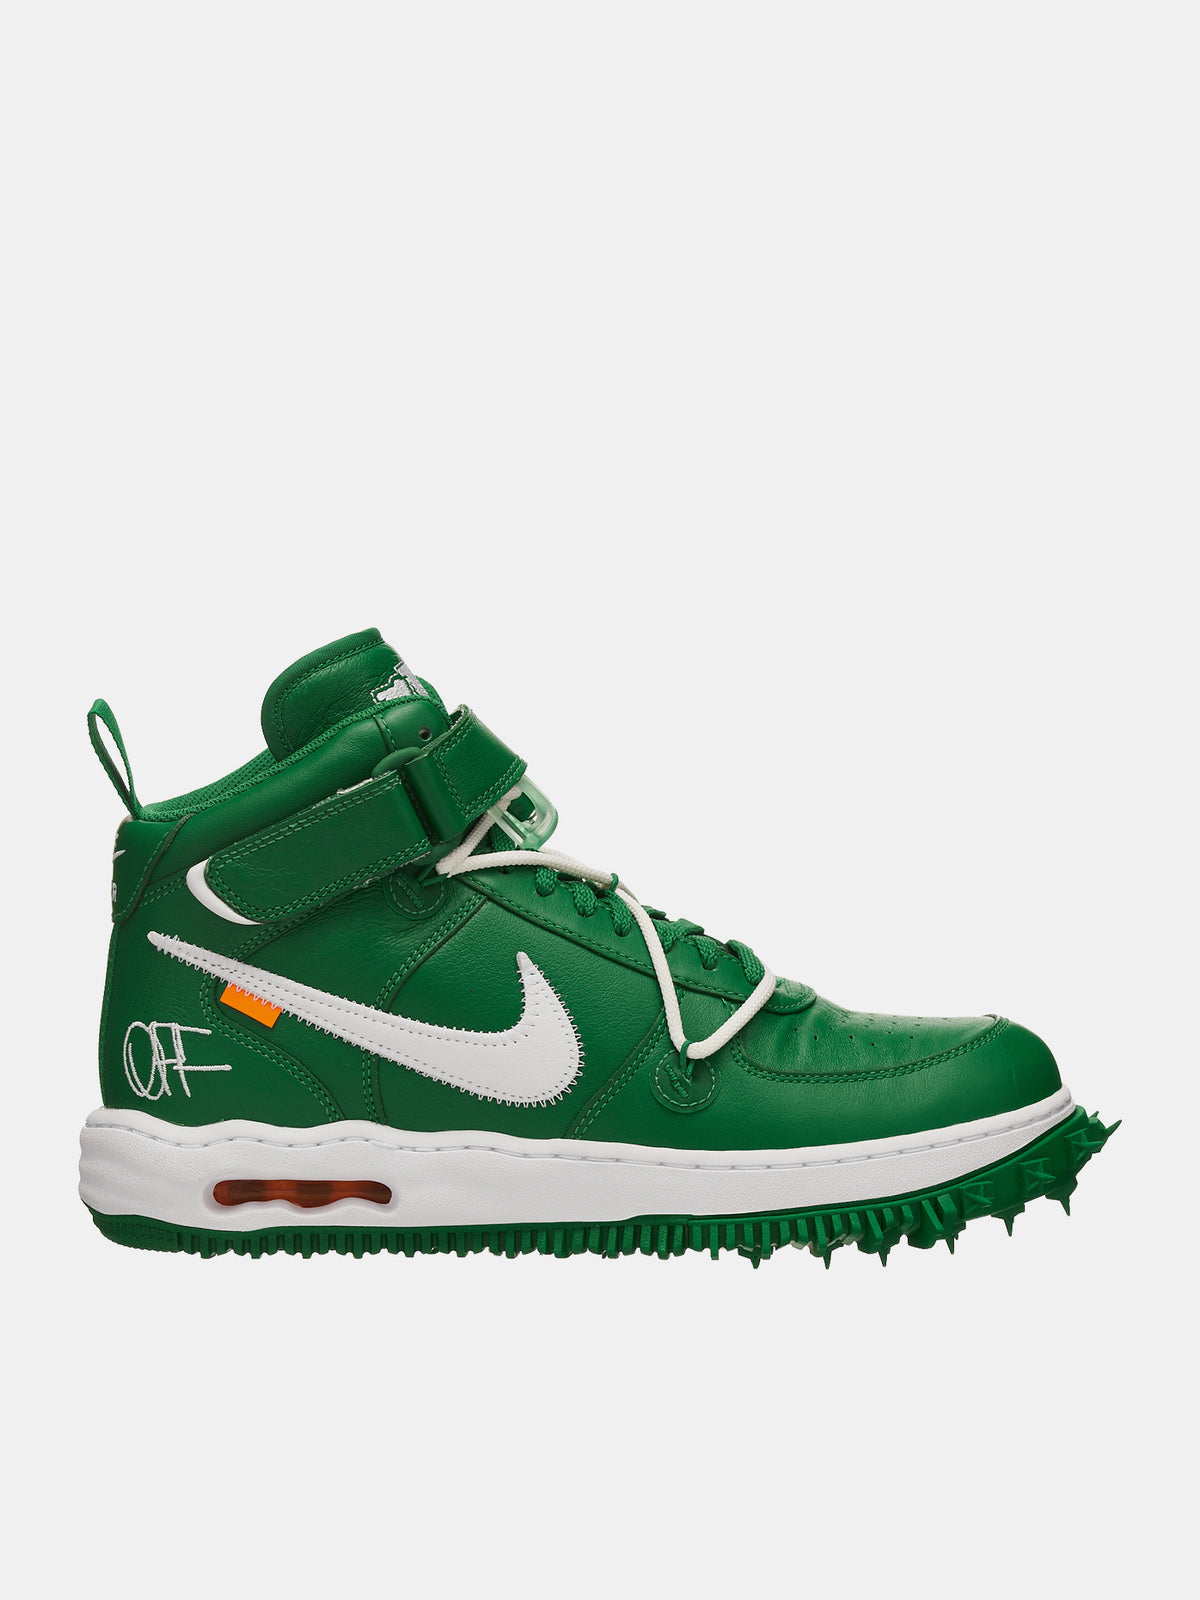 Off-White™ Air Force 1 Mid (DR0500-300-PINE-GREEN-WHITE)